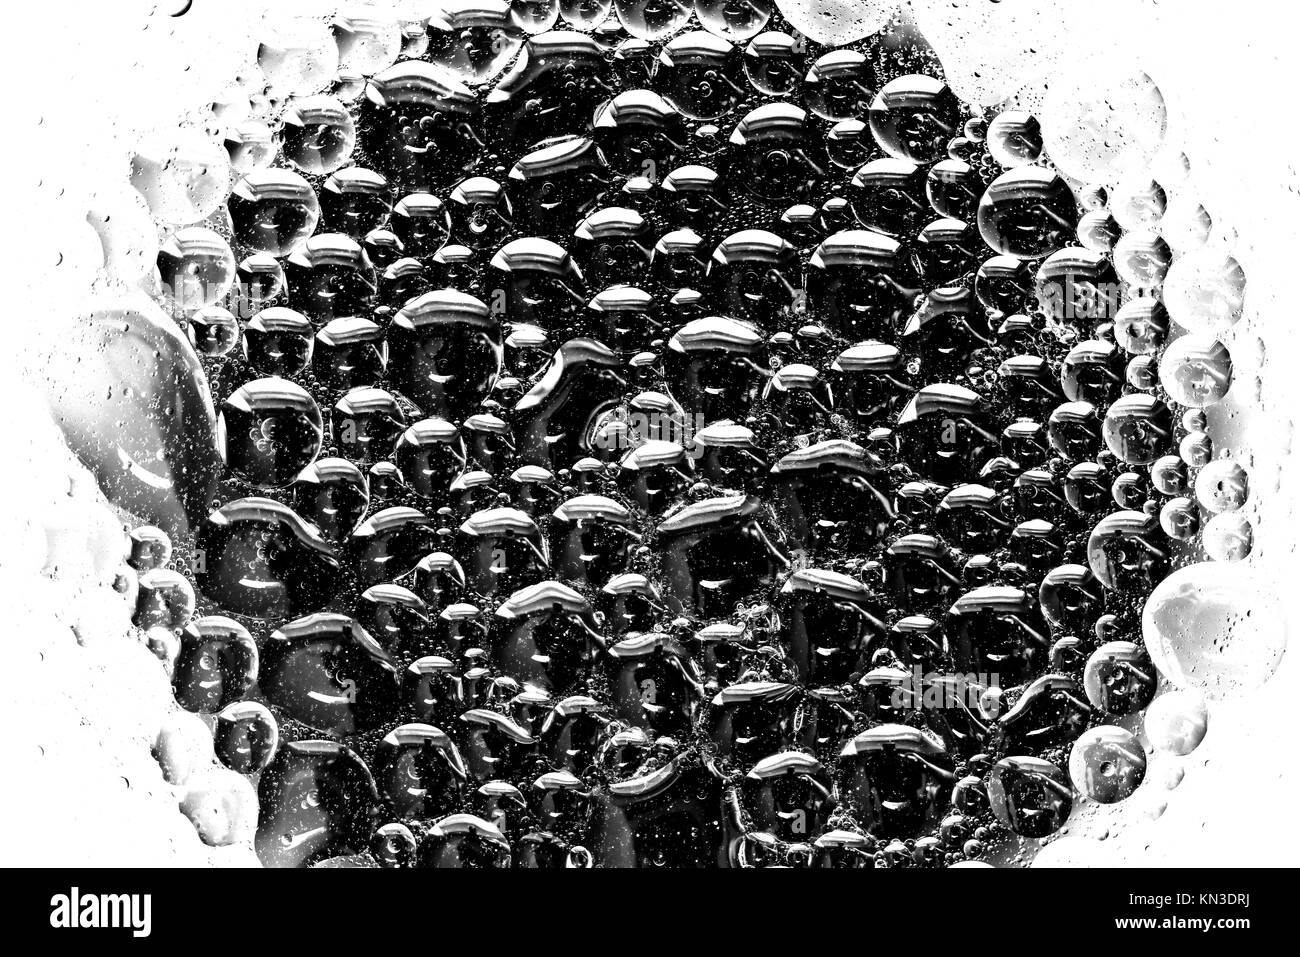 Oil in water emulsion Black and White Stock Photos & Images - Alamy